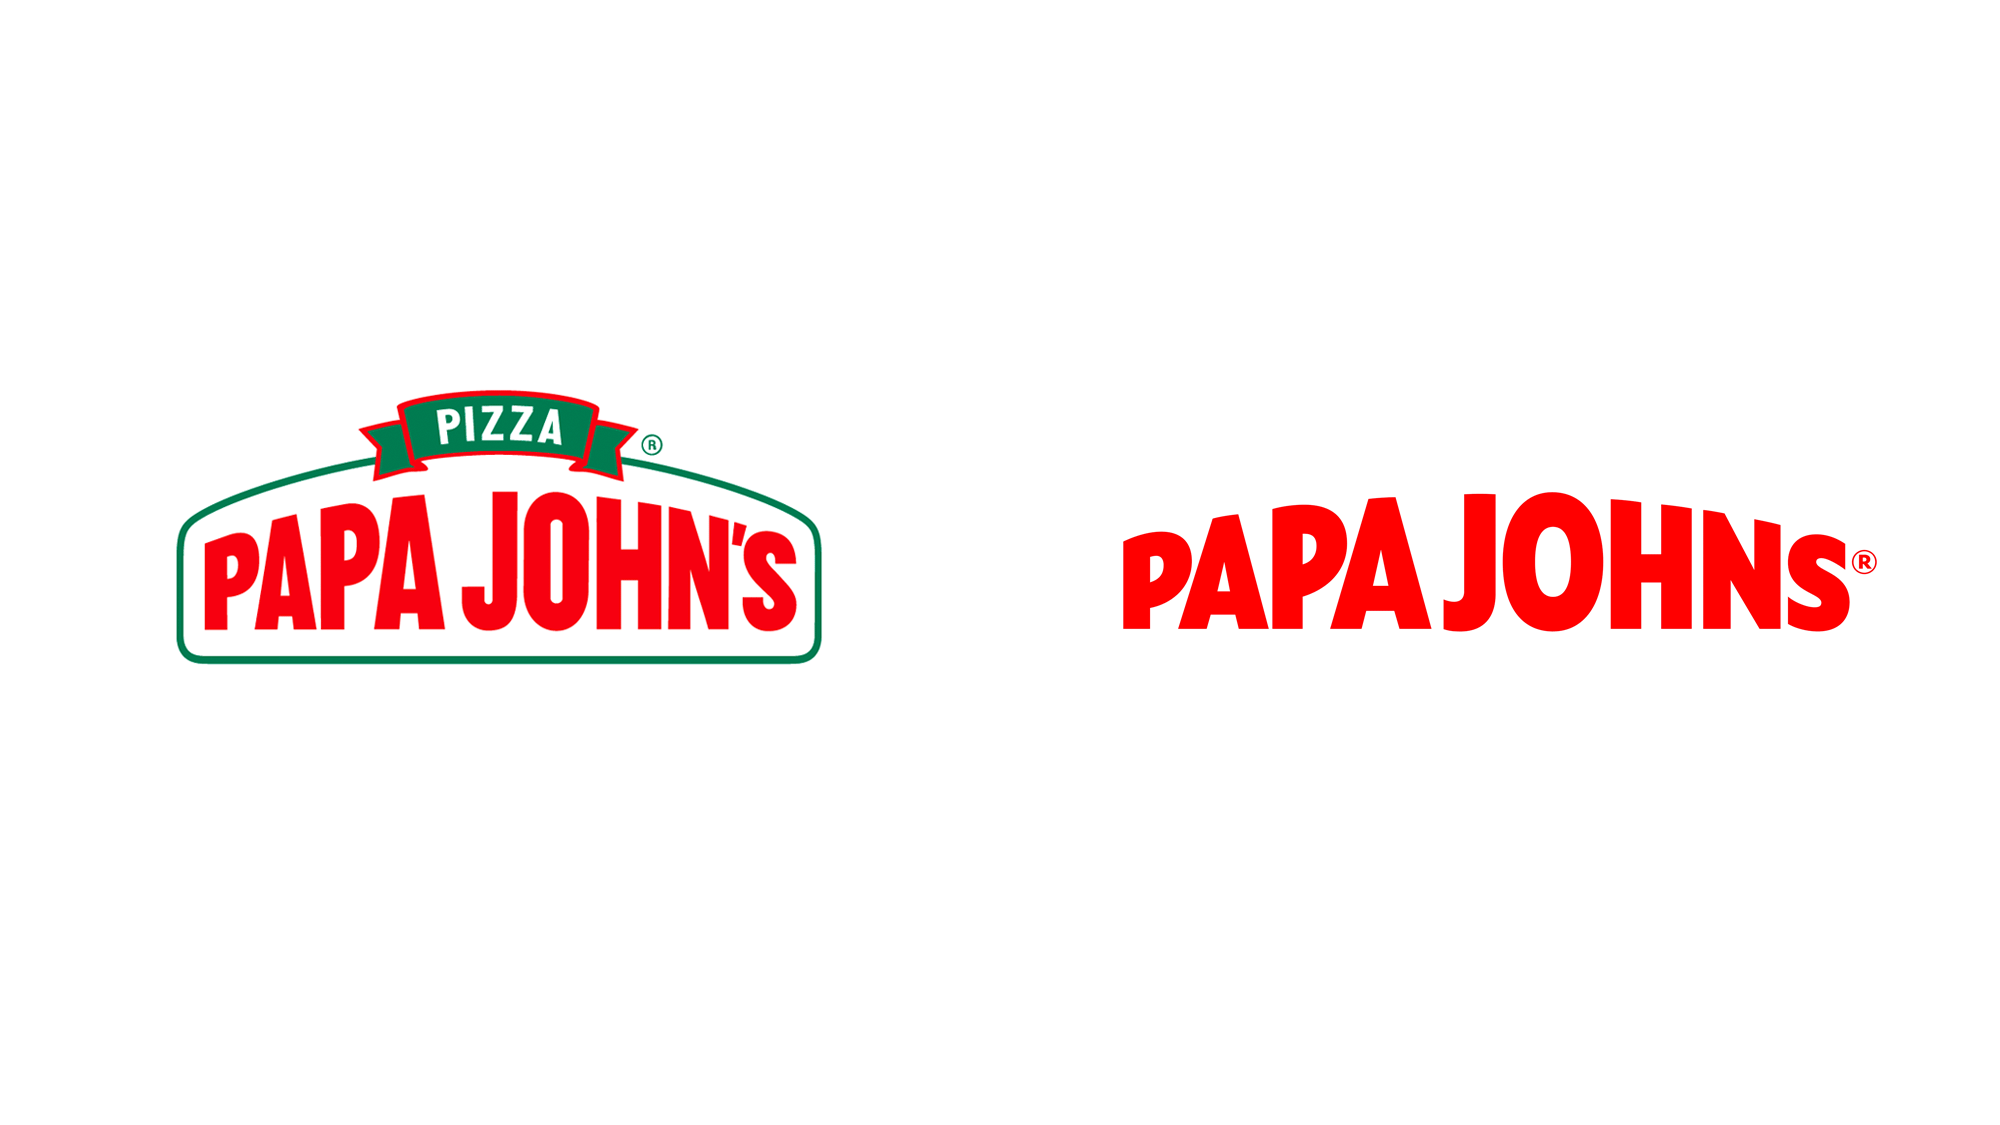 Papa Johns by Mathews Hale Design and forpeople